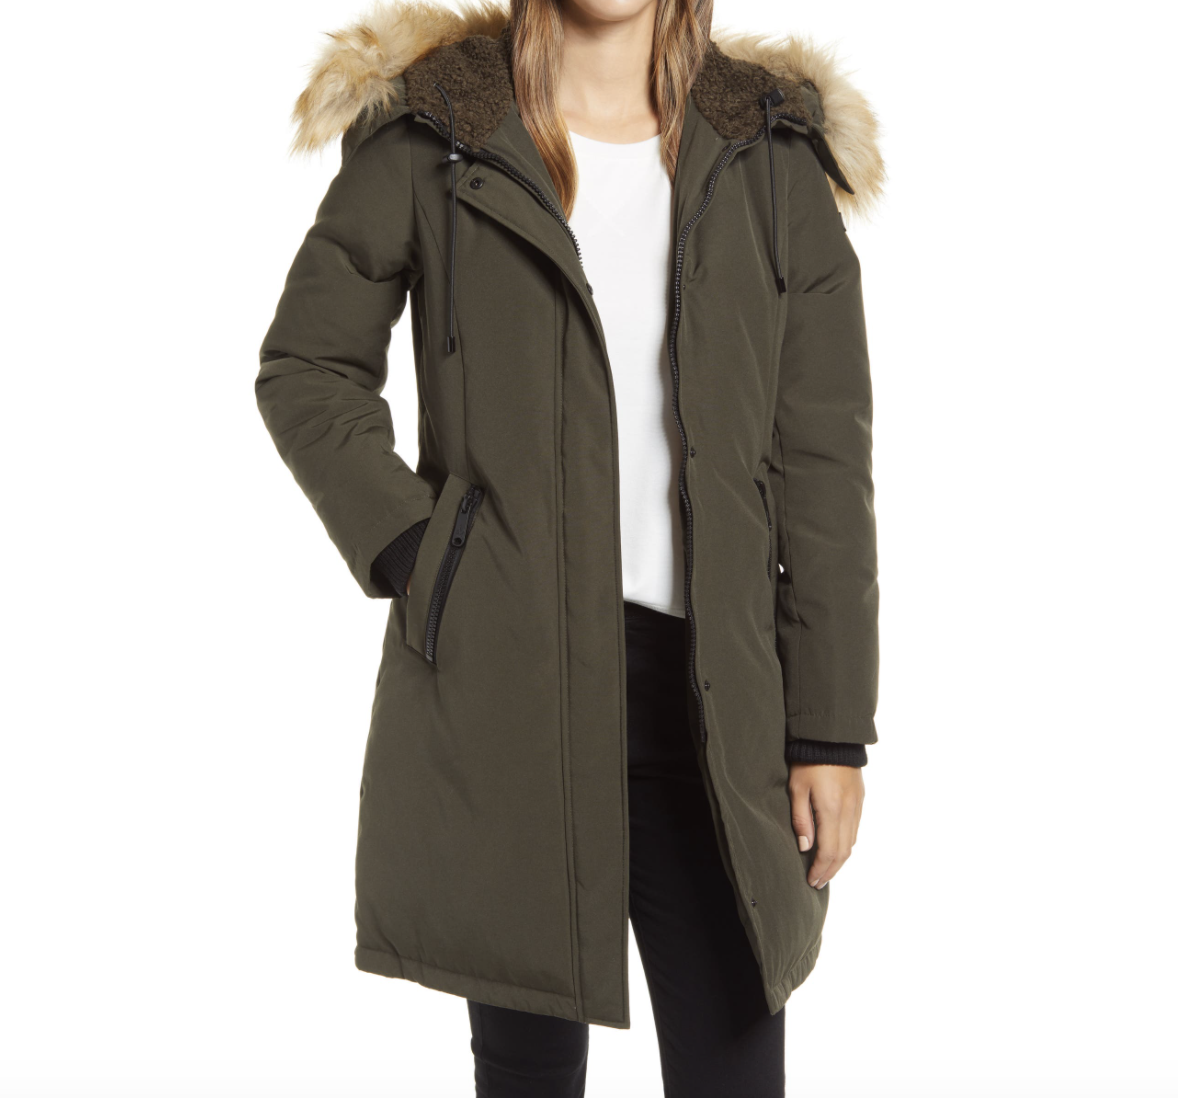 6 Key Pieces to Survive Winter - Basically B